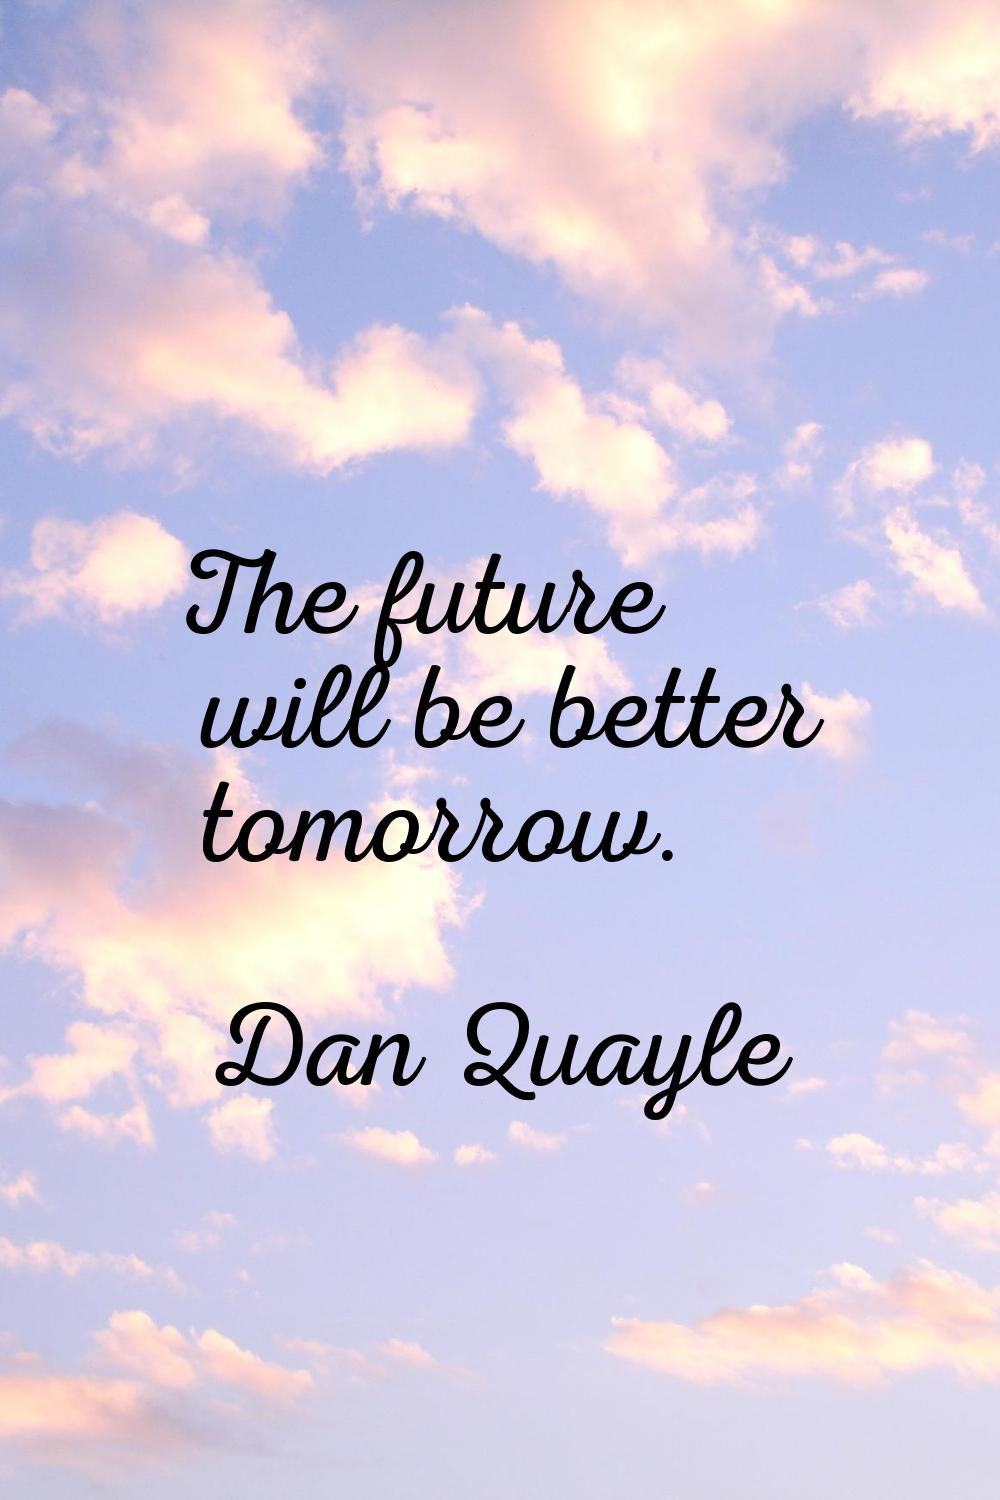 The future will be better tomorrow.